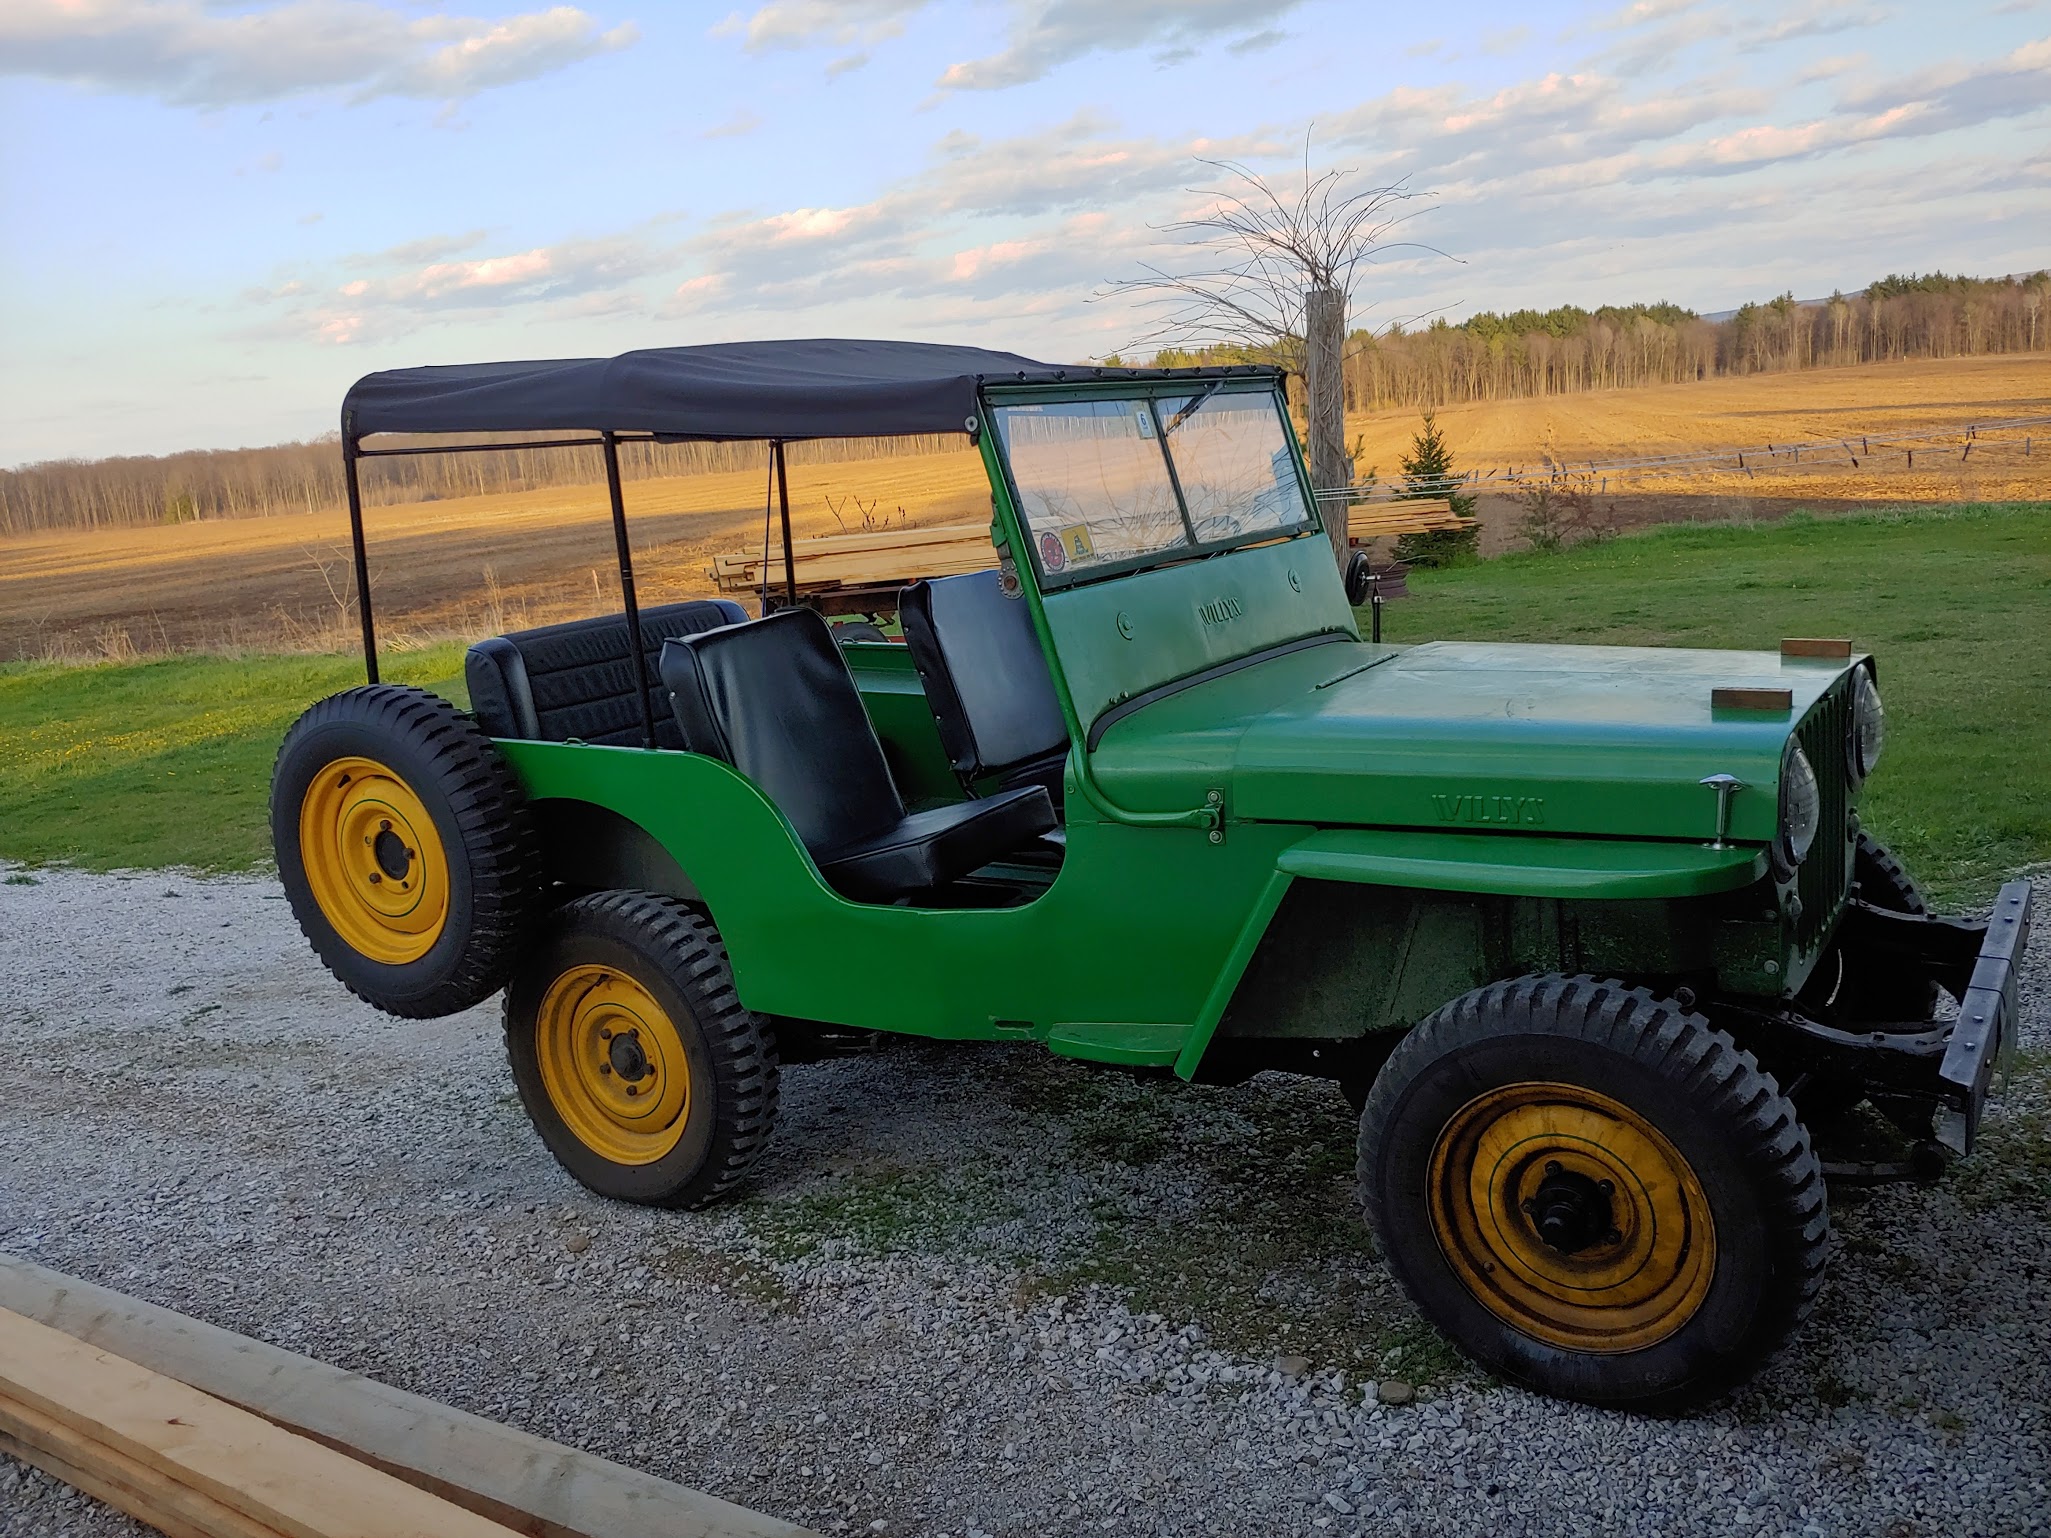 Dad’s old Jeep provides escape from COVID-19 blues